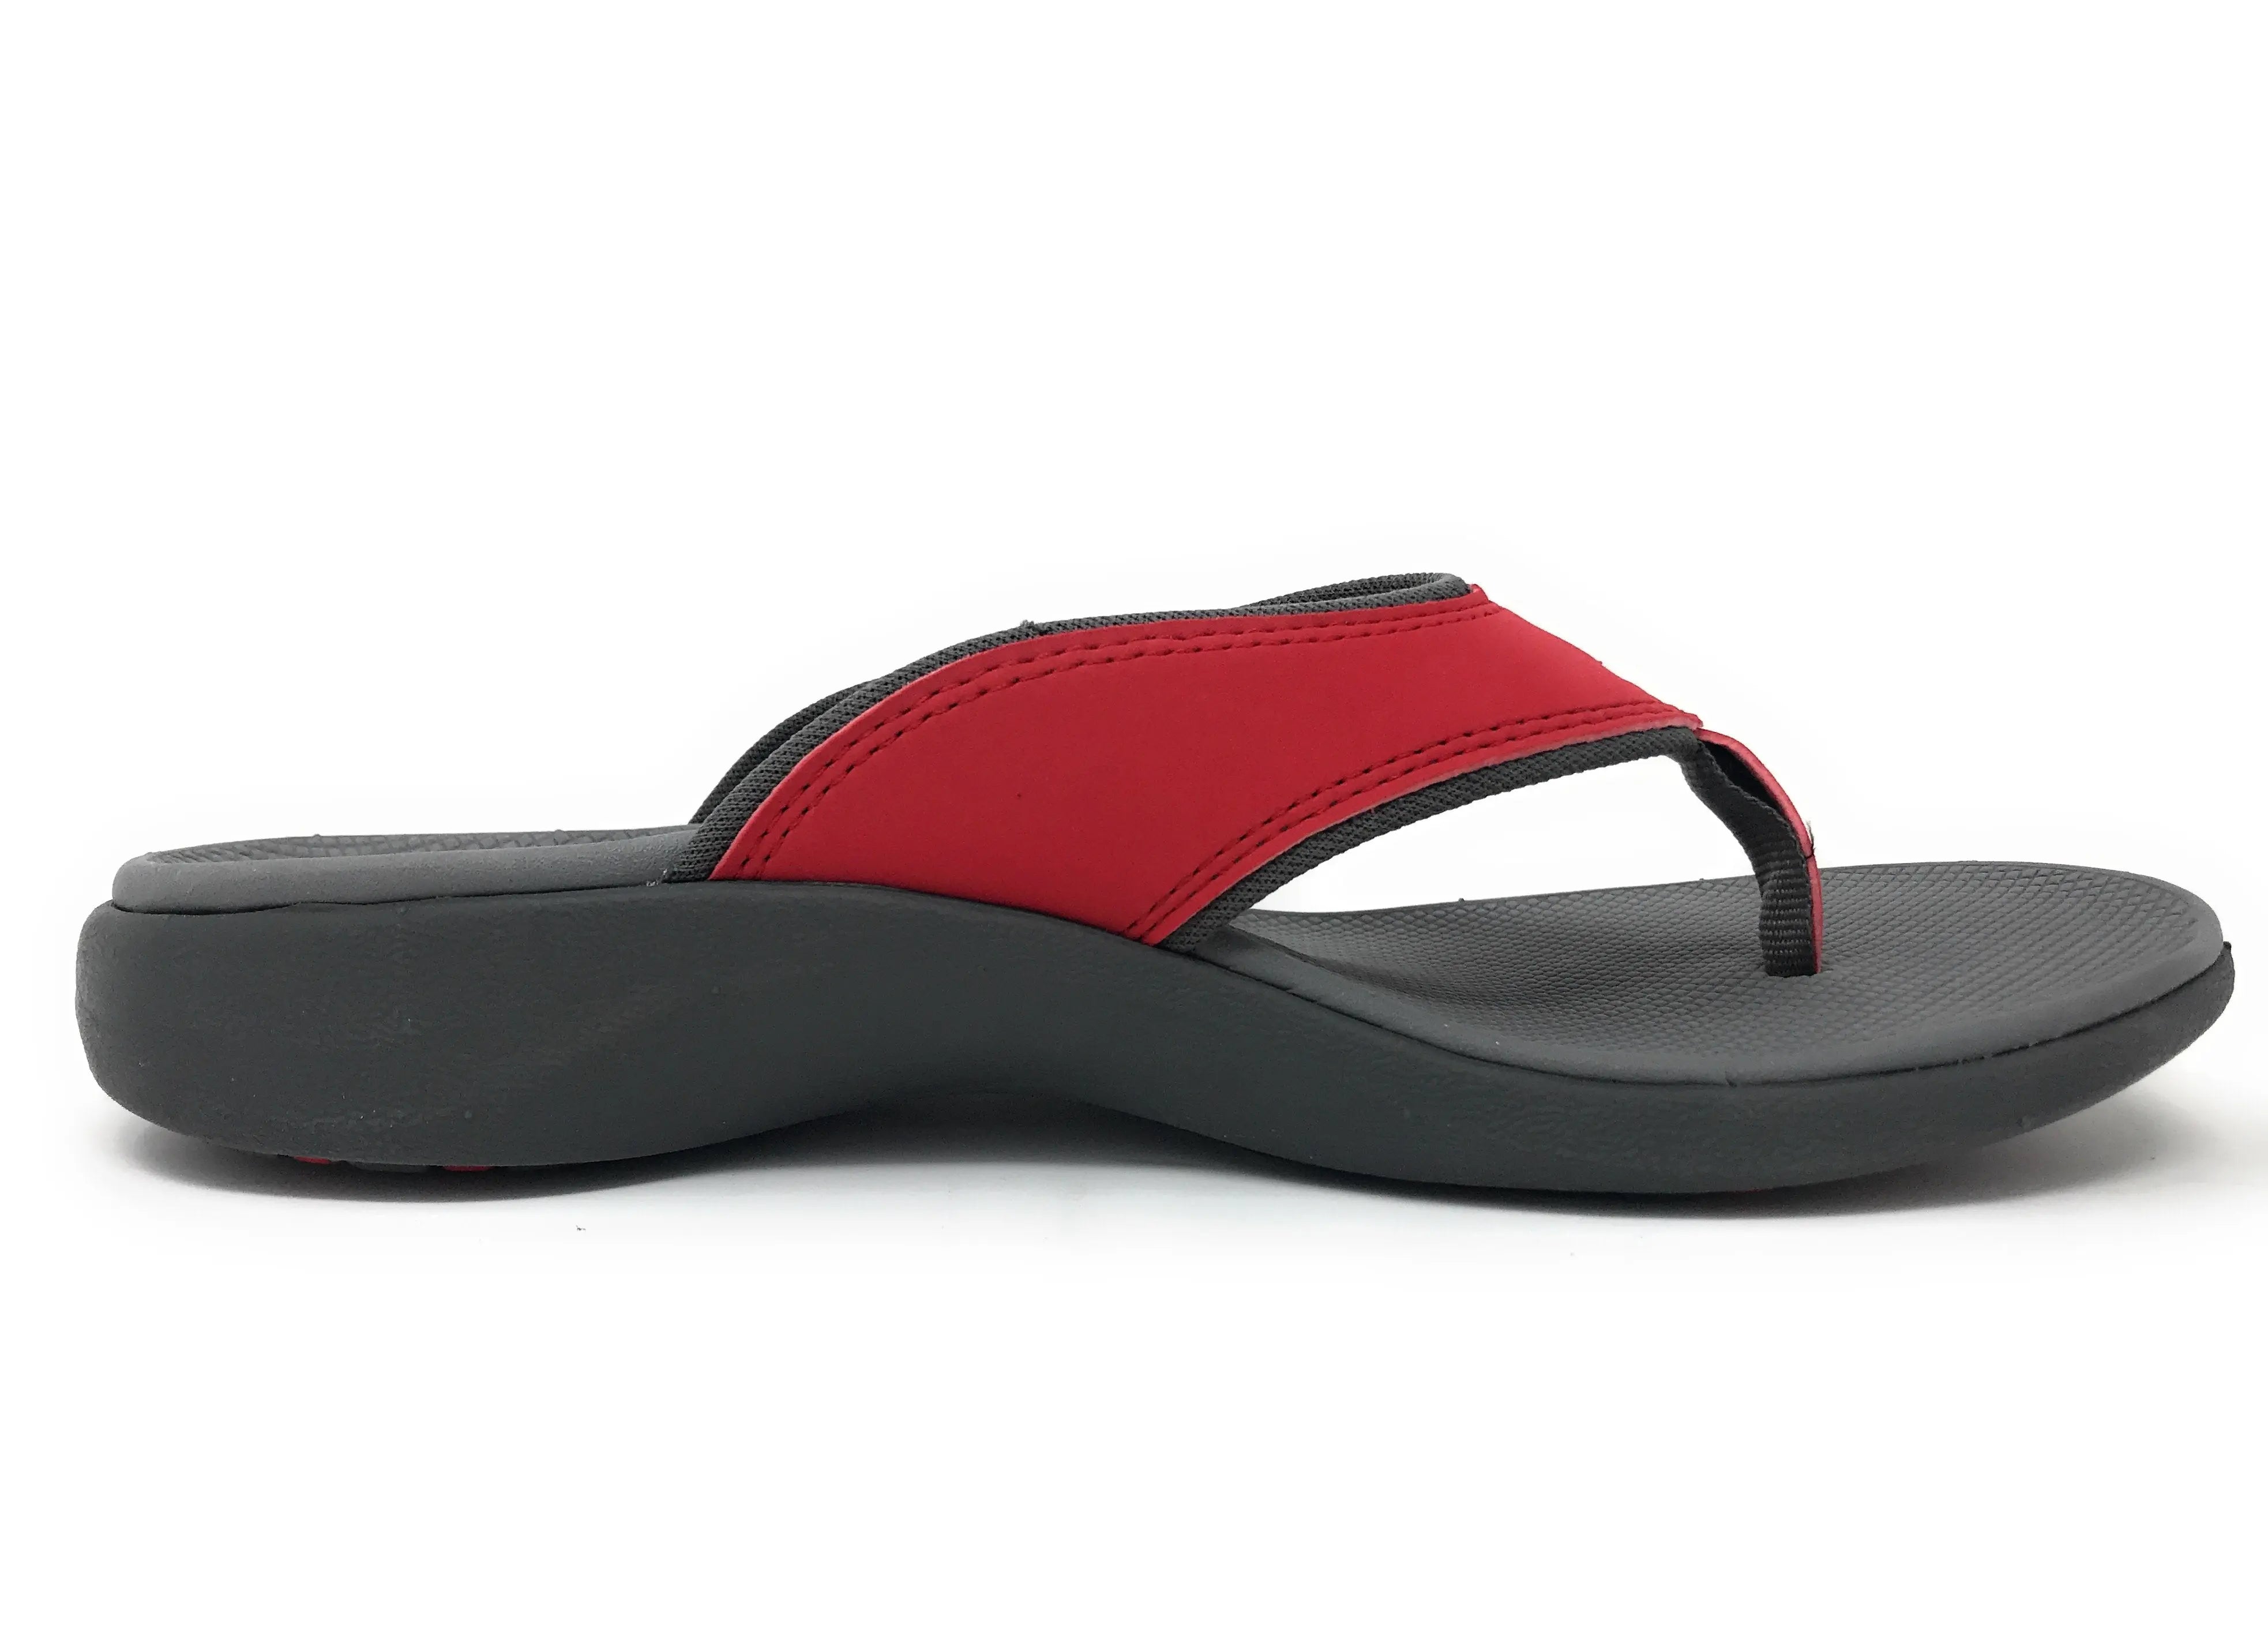 Dr.Comfort Sandals and Slippers Styles, Prices - Trendyol